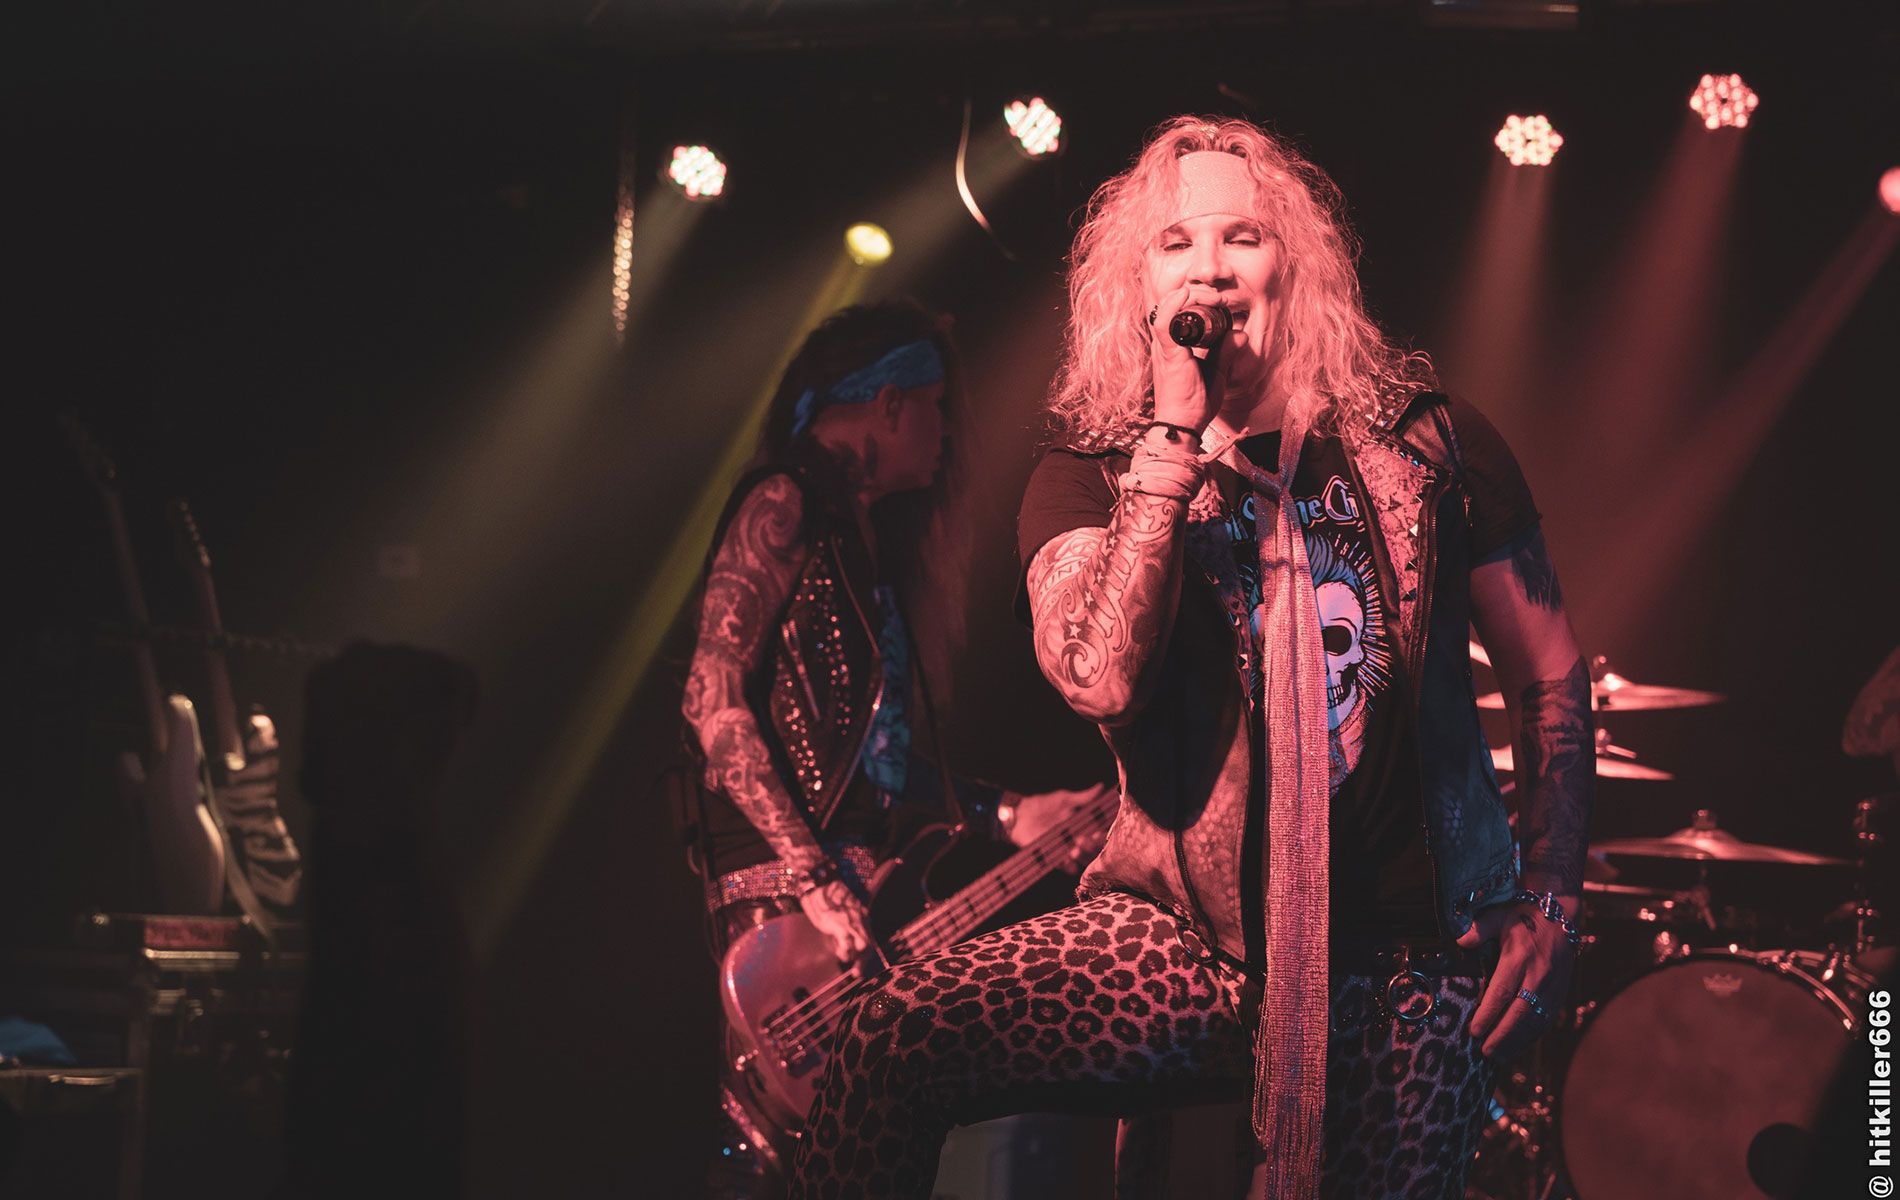 Steel-Panther-L-A-Maybe-Shakal-Today-0036.jpg